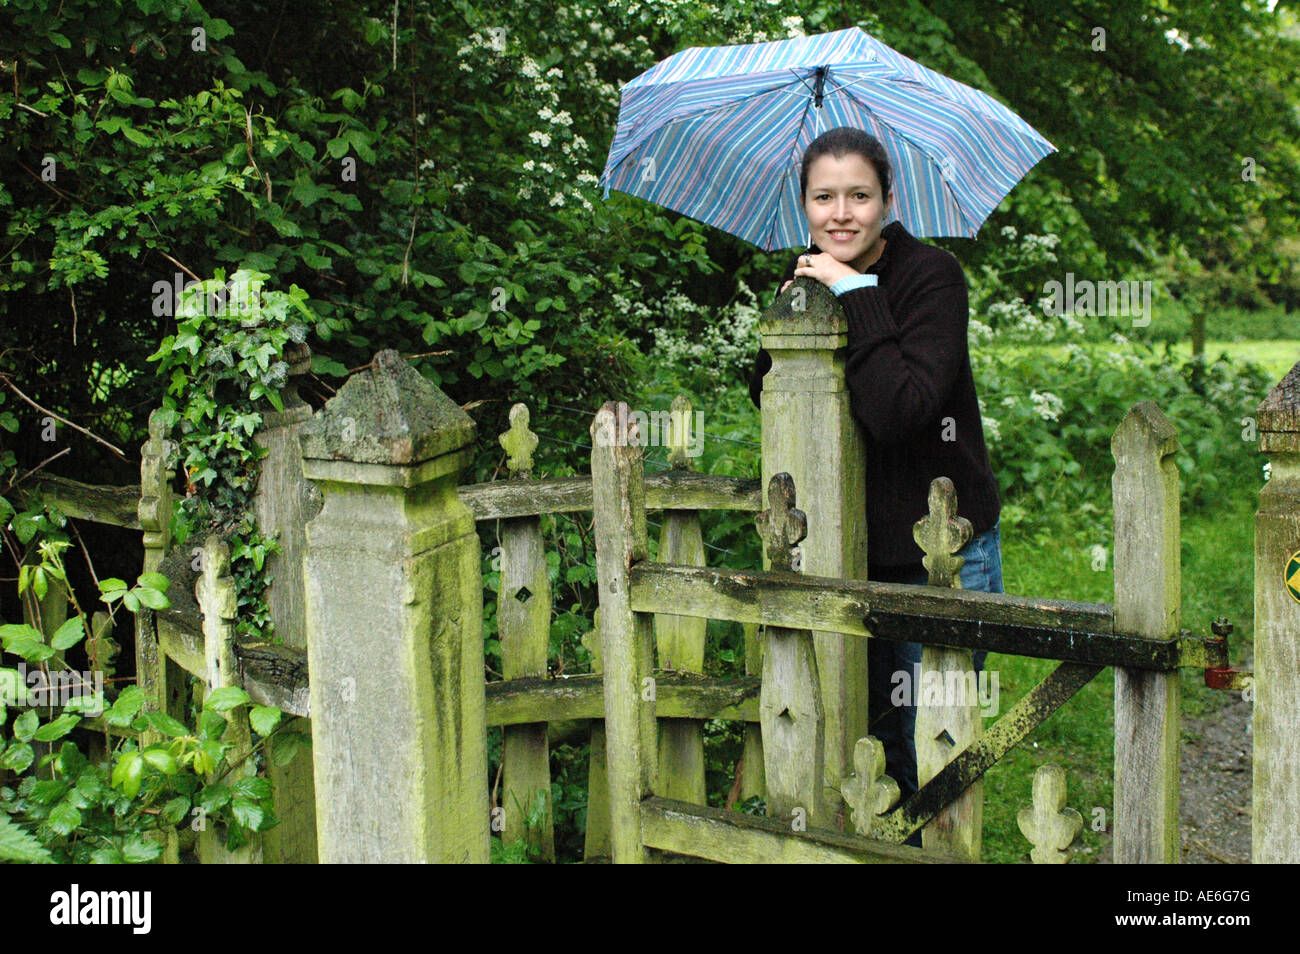 Attractive girl leaning on an old gate with an umbrella Stock Photo